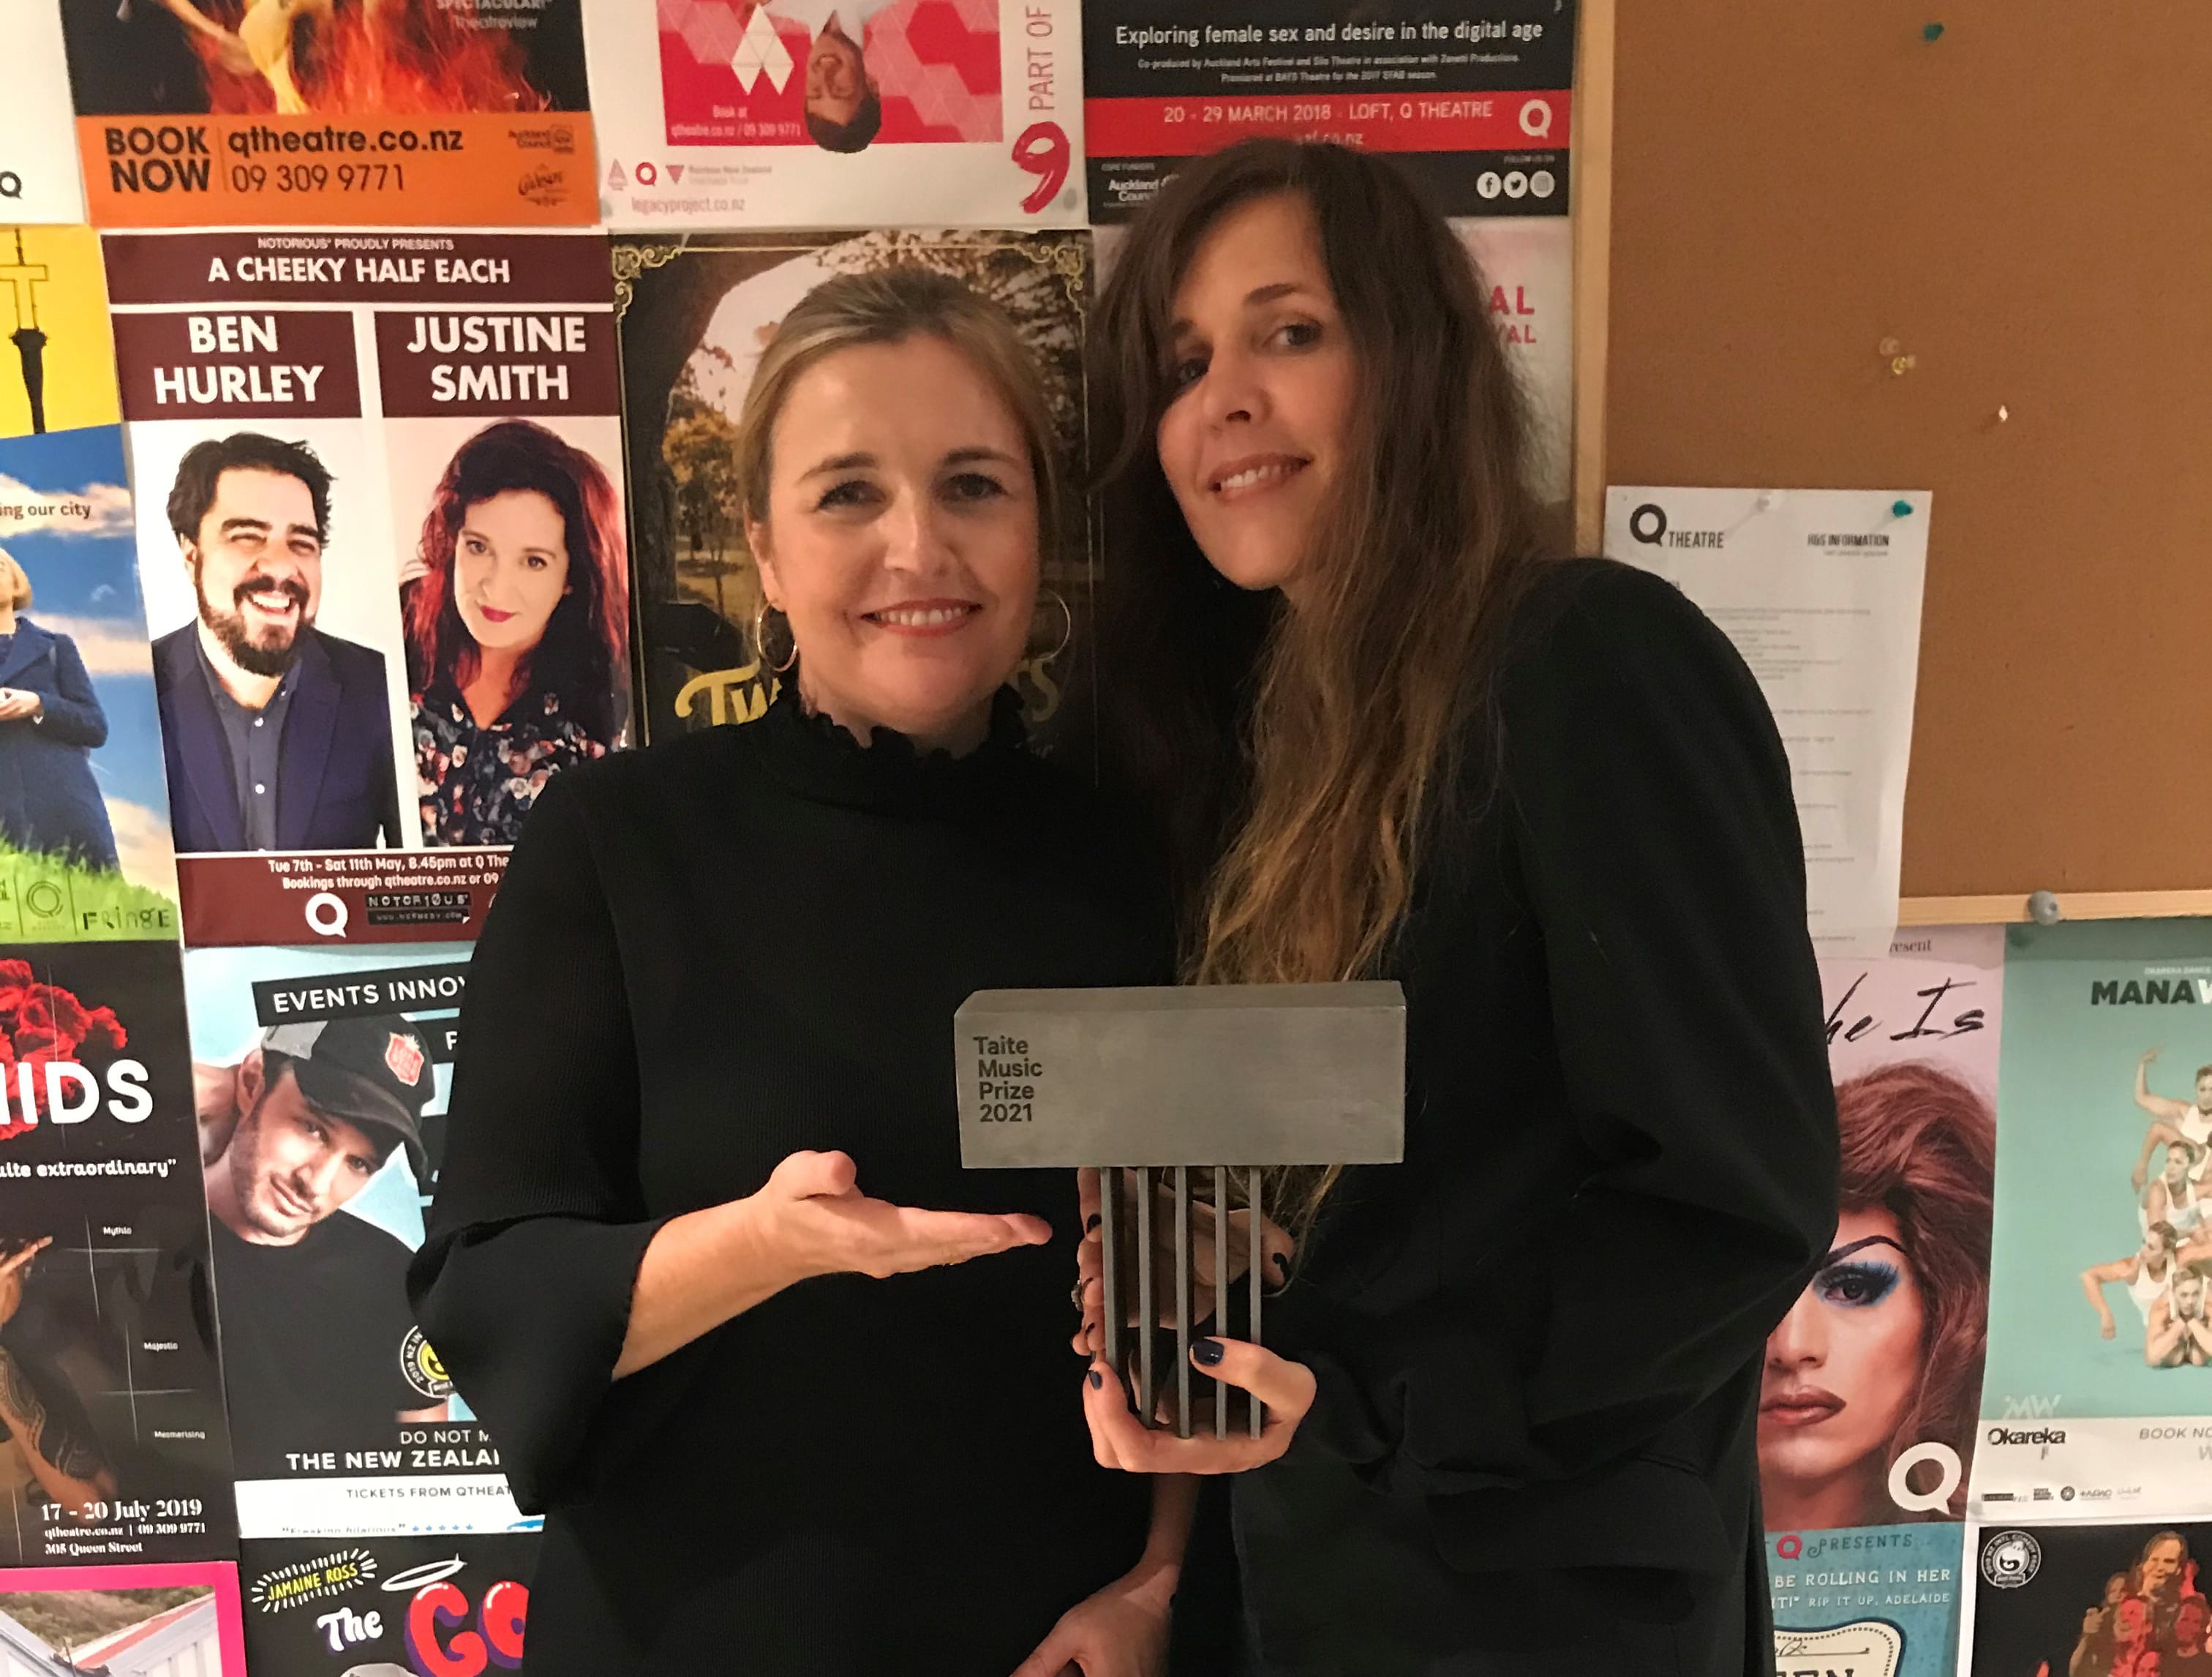 Charlotte Ryan and Reb Fountain at the Taite Music Awards 2021. Reb is holding the Taite Music Prize trophy.